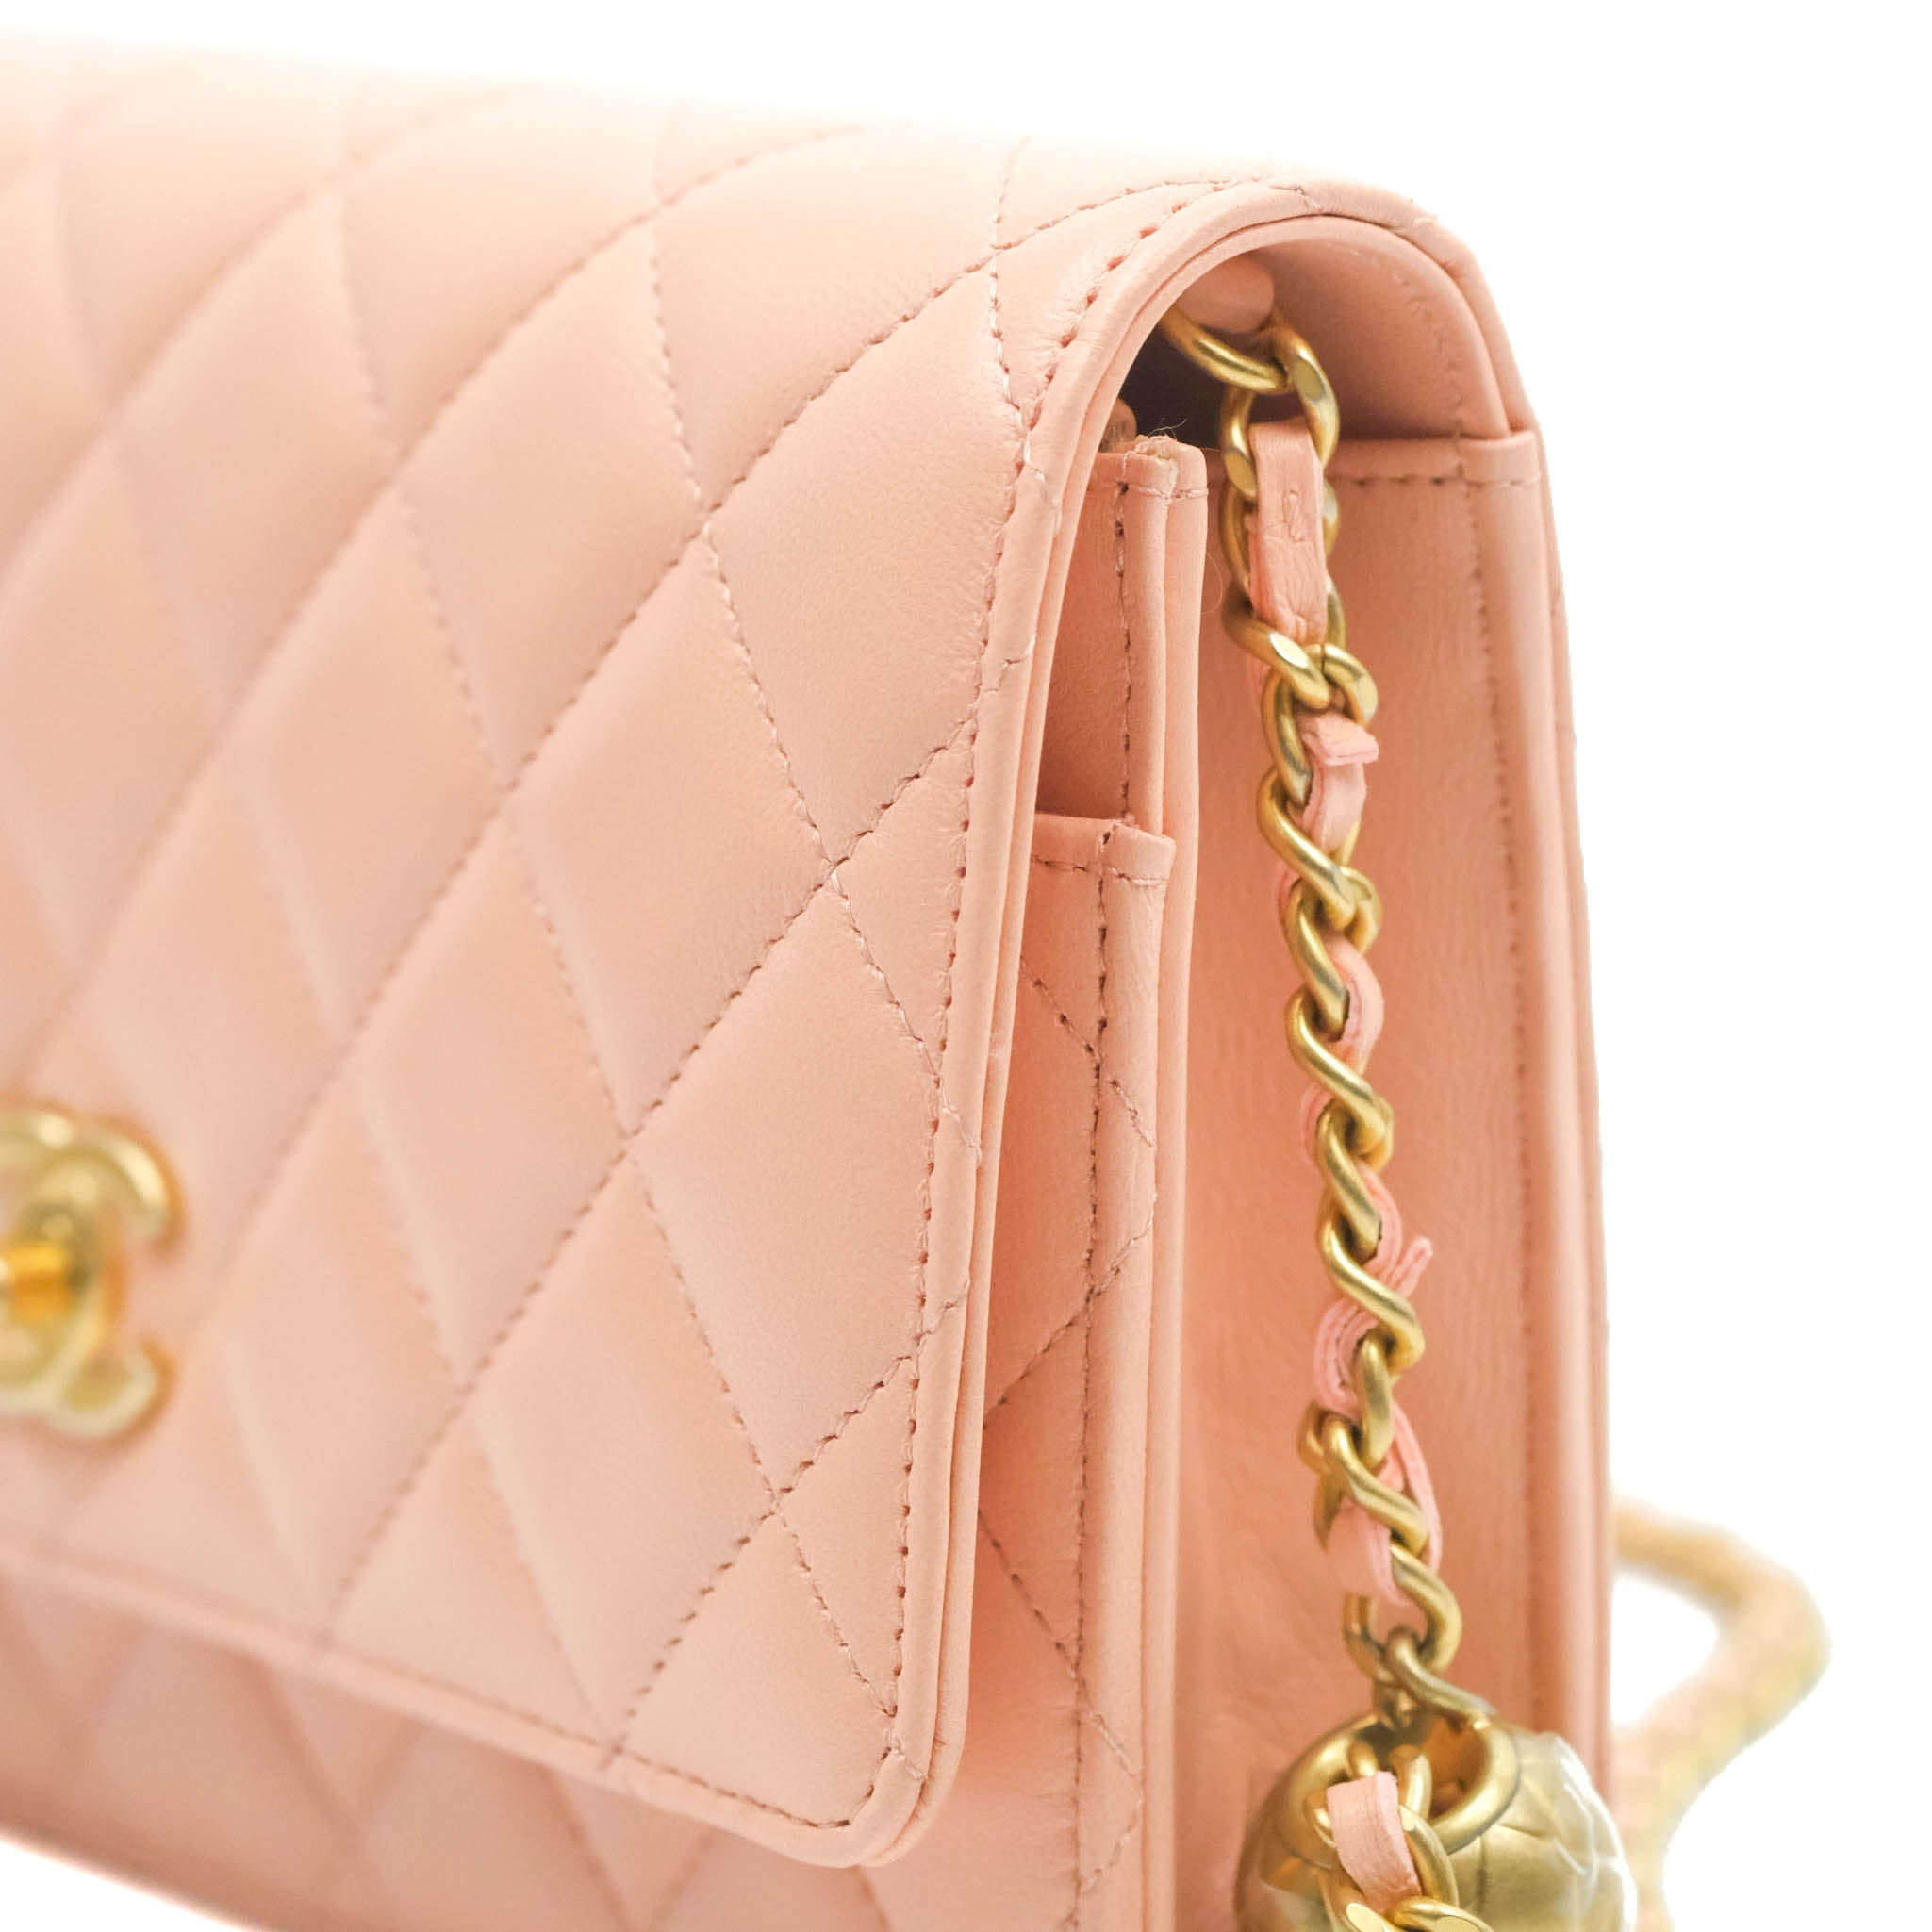 Chanel Quilted Classic Wallet on Chain WOC Pink Caviar Gold Hardware – Coco  Approved Studio